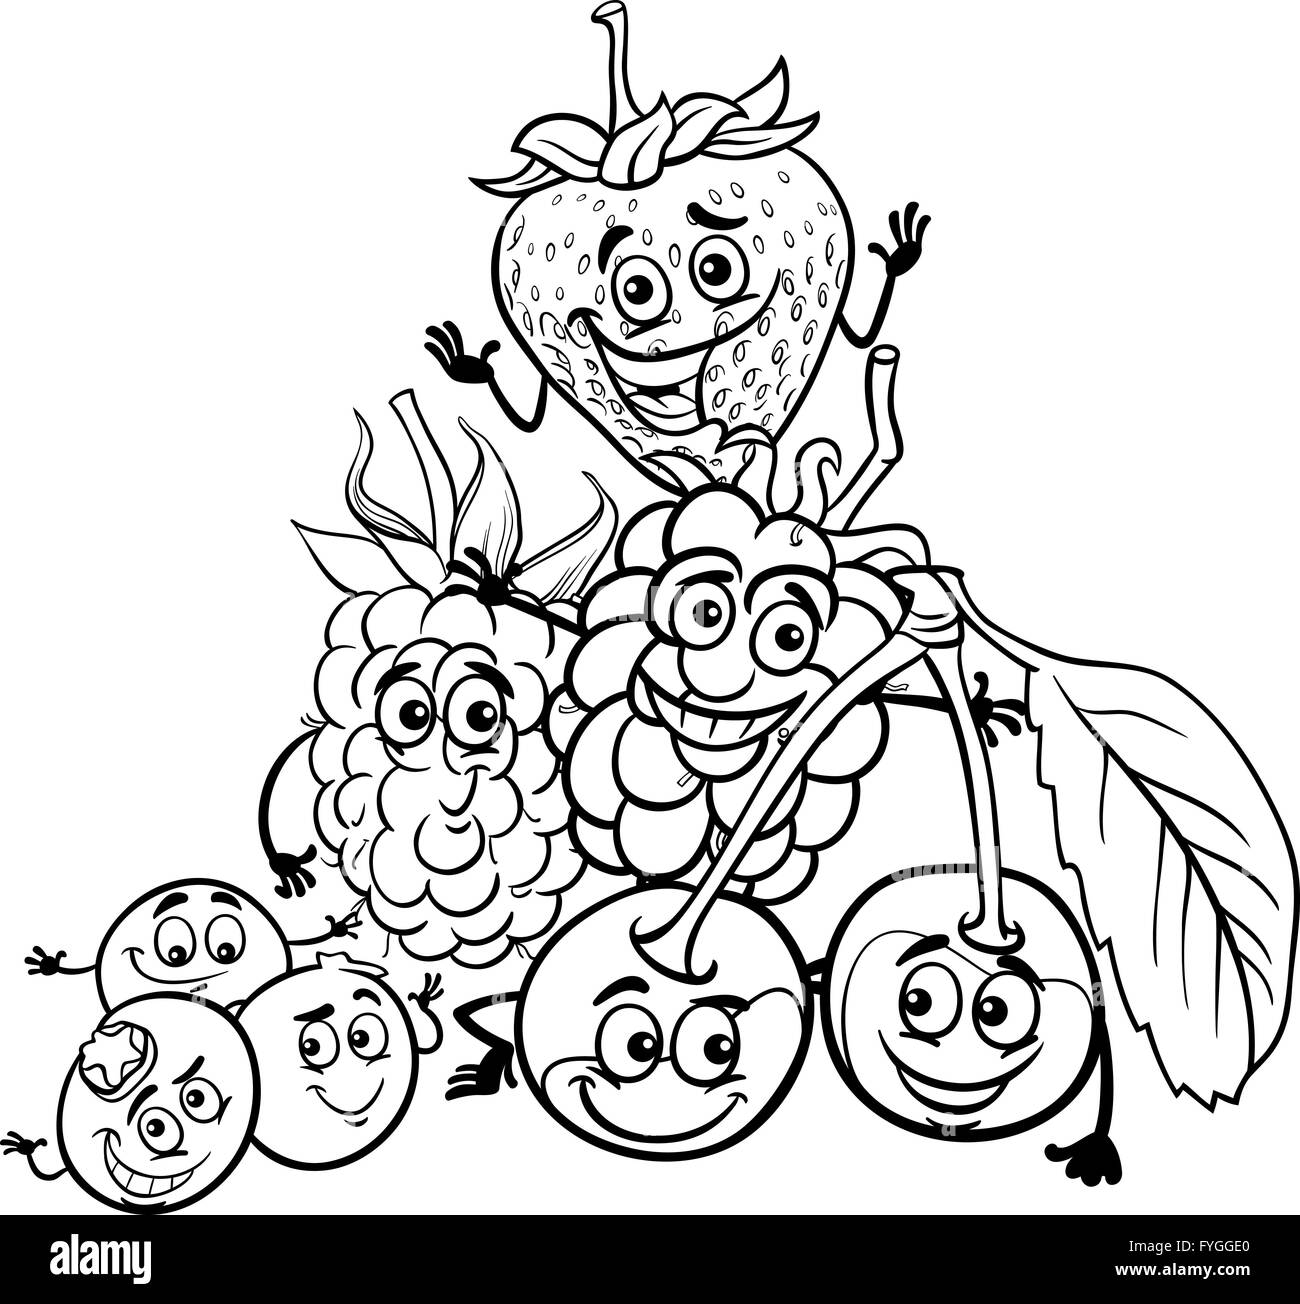 berry fruits cartoon for coloring book Stock Photo